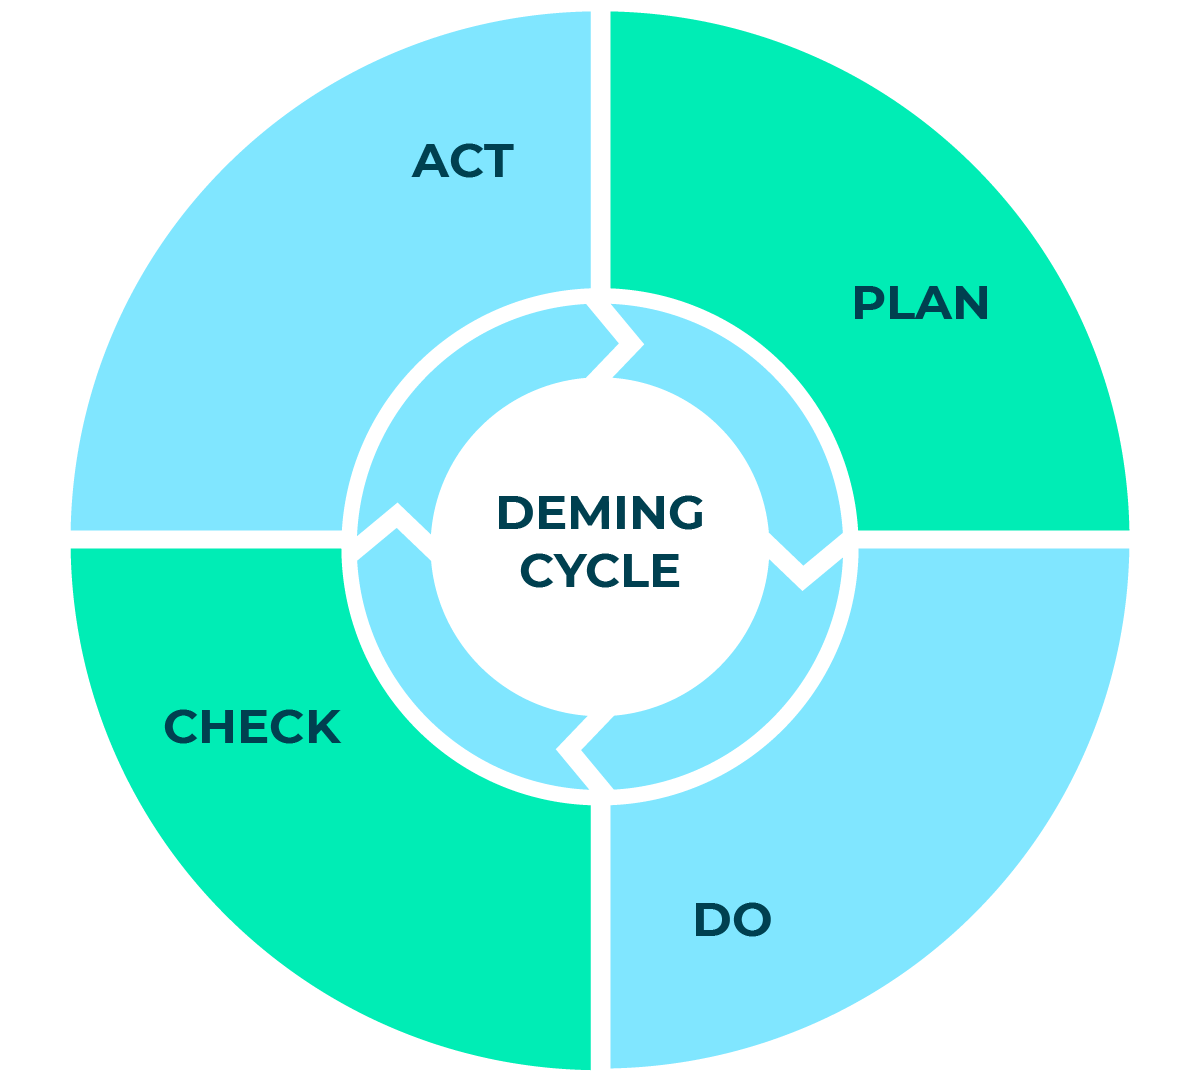 Decorative image: Circle diagram showing The Deming cycle, a continuous quality improvement model which consists of a logical sequence of four key stages: Plan, Do, Check, Act.